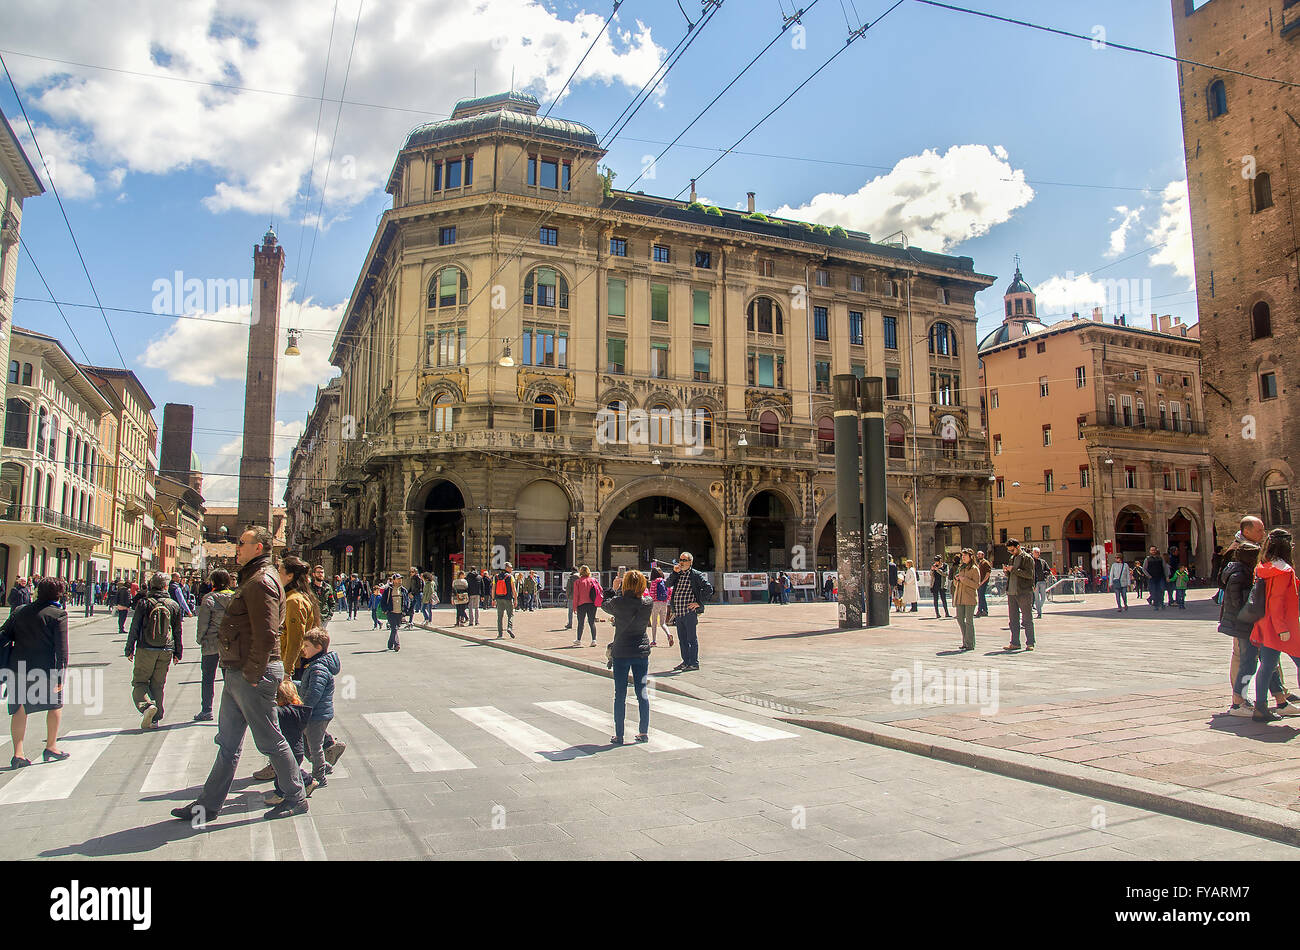 Bologna, Italy, April 25, 2016: via Rizzoli and Piazza Re Enzo full of people walking and take pictures Stock Photo